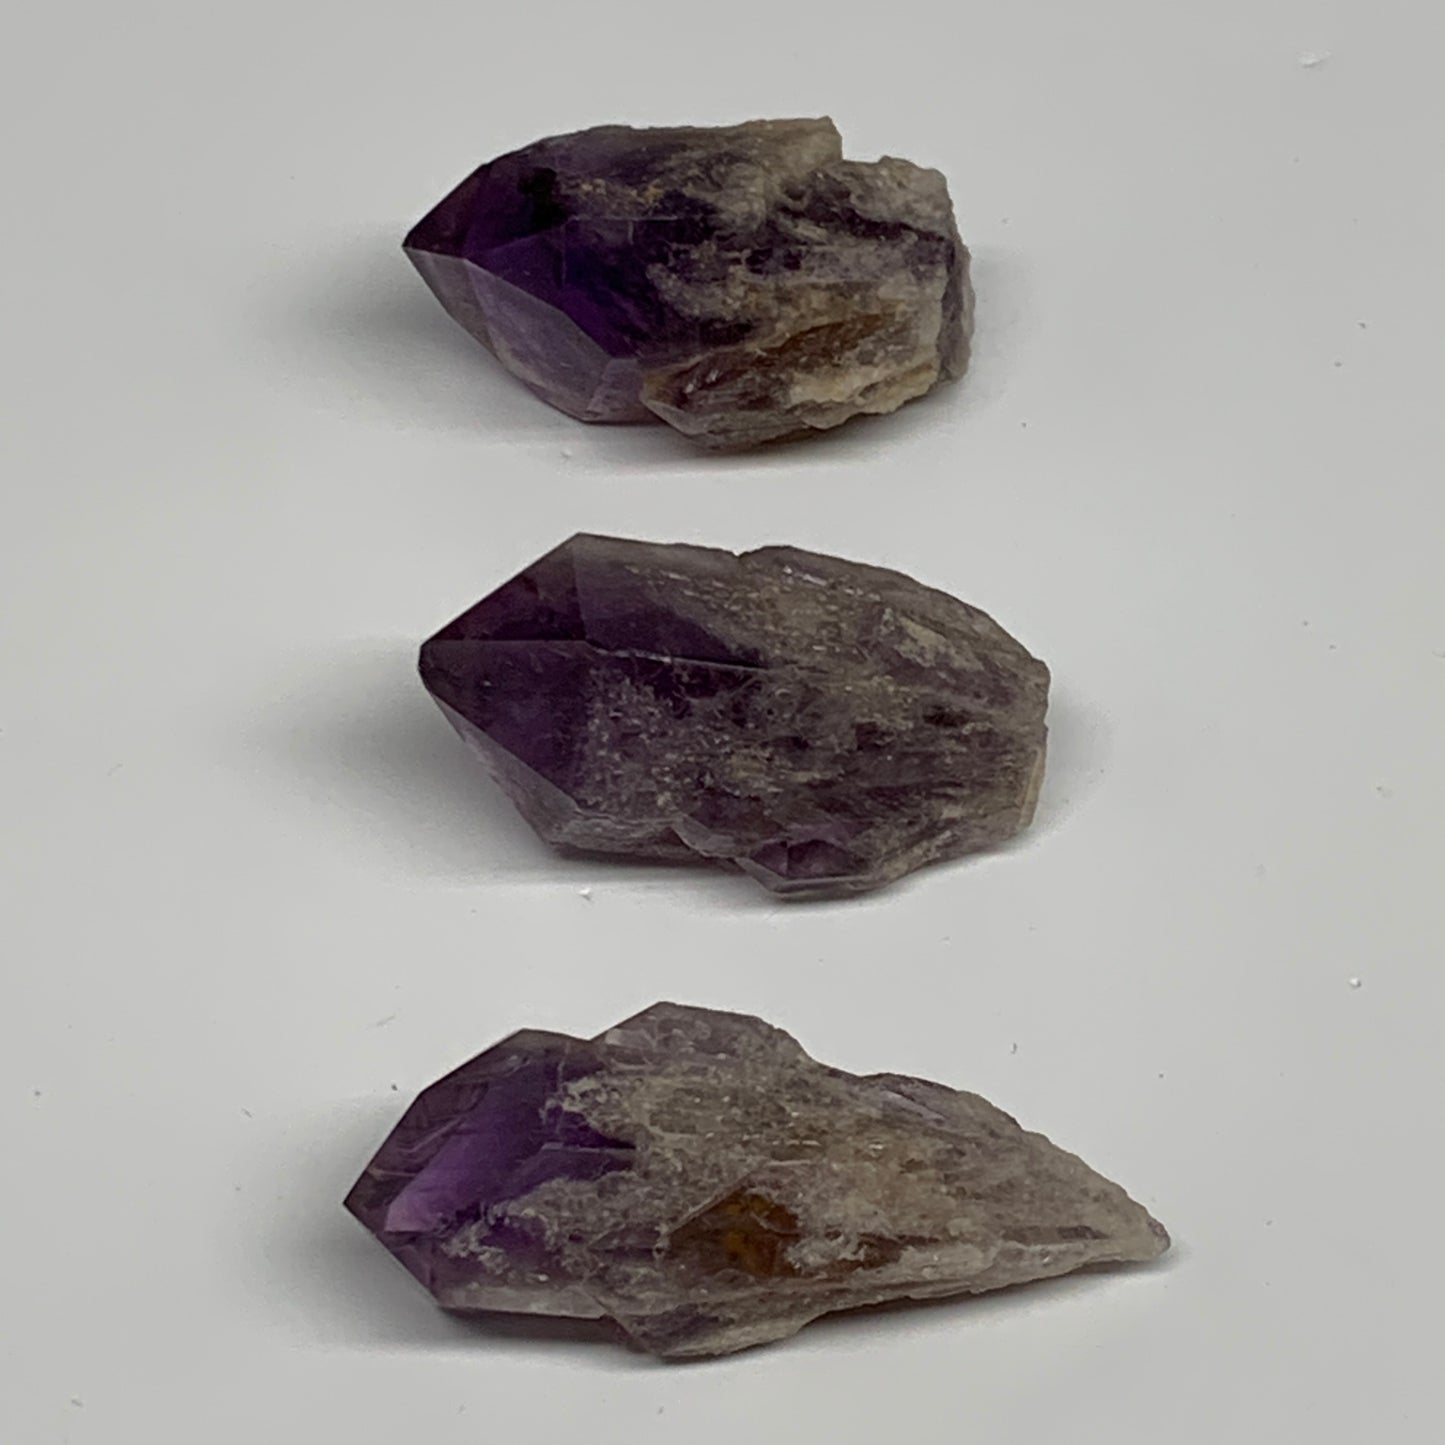 120g, 2" - 2.4", 3pcs, Amethyst Point Polished Rough lower part, B32390